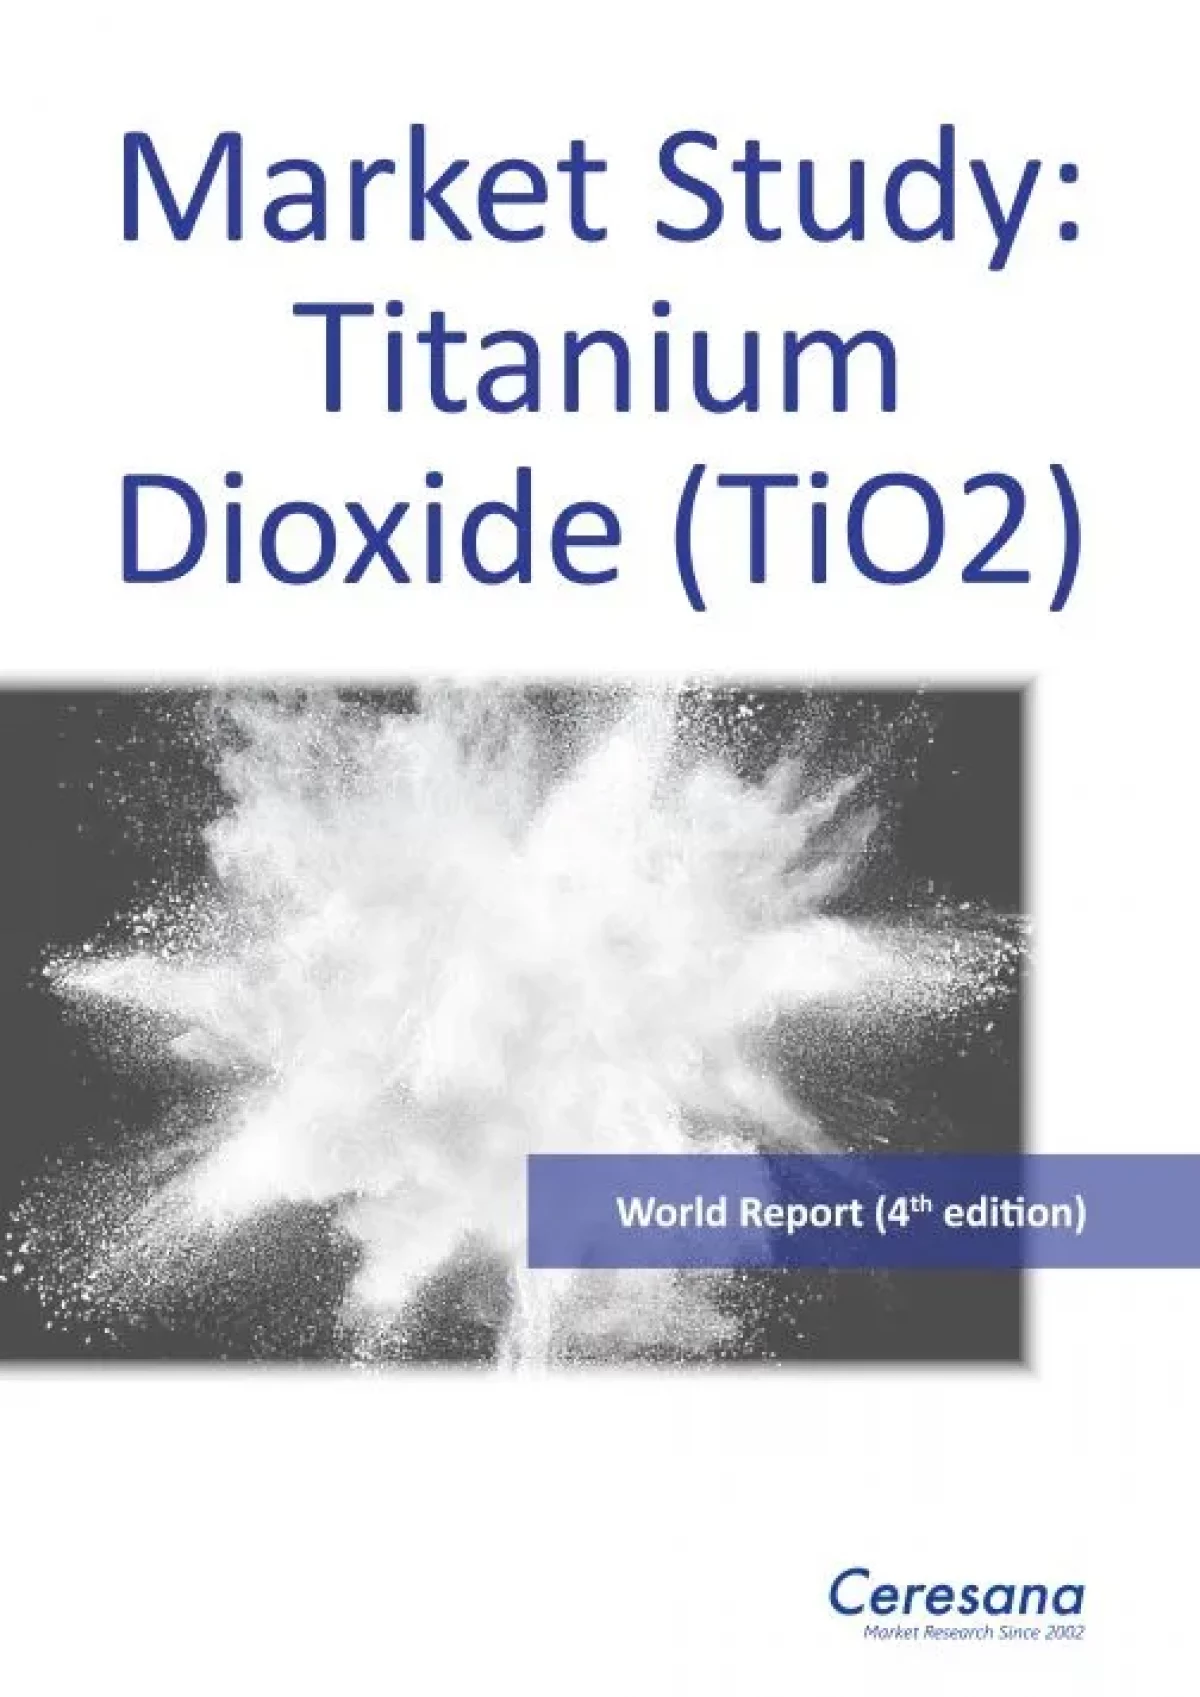 What's the Risk? – Titanium Dioxide - Center for Research on